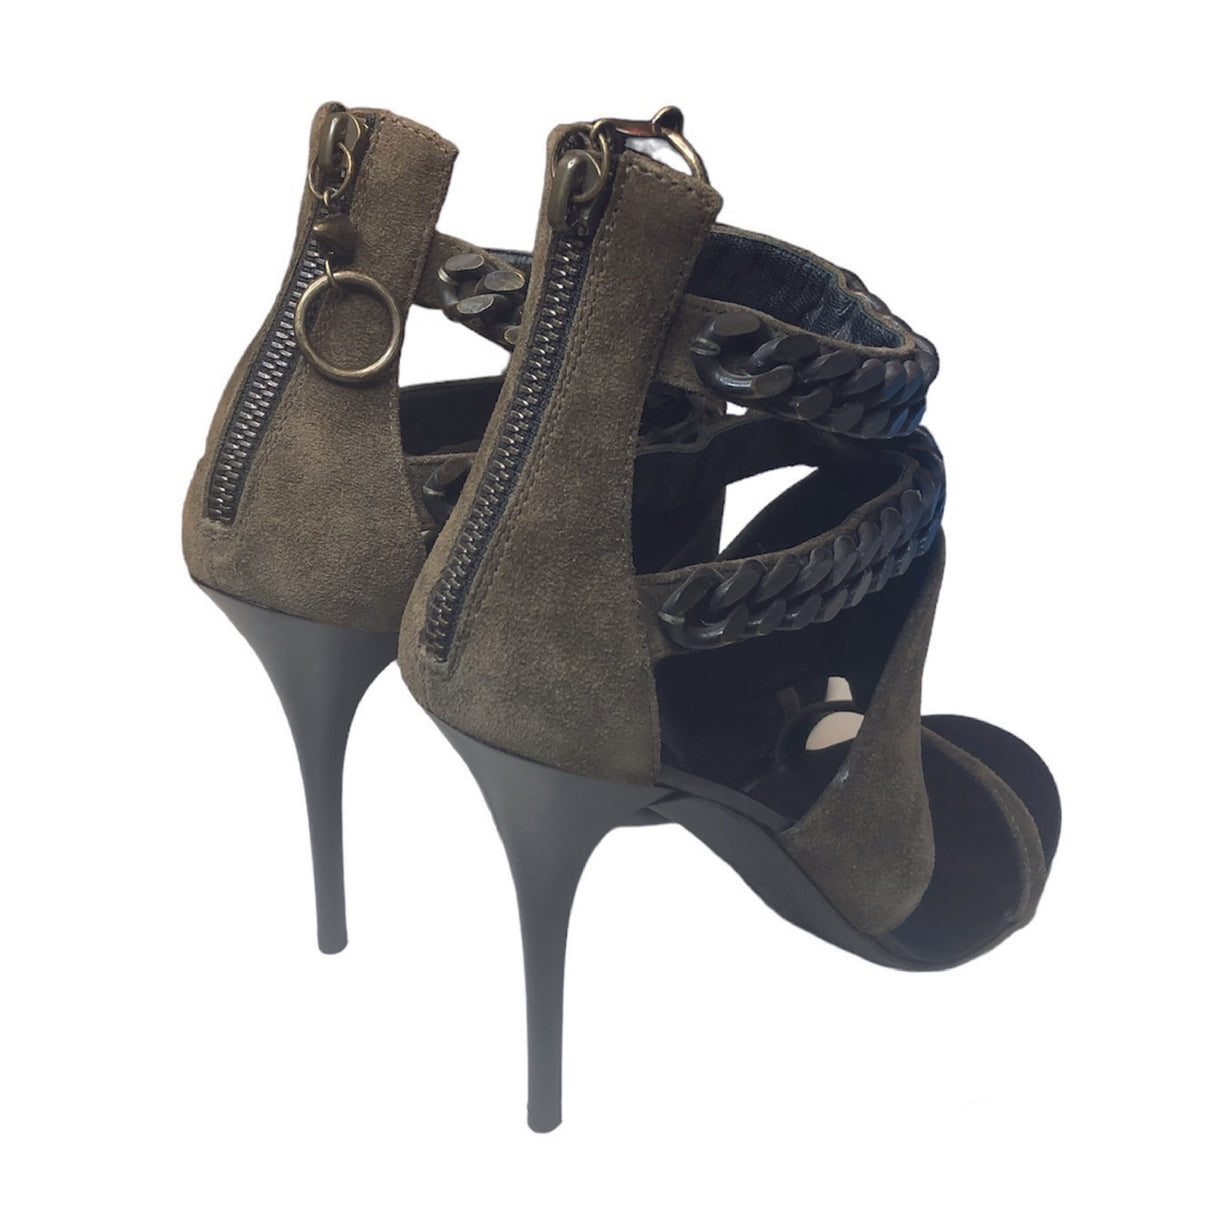 A Second Chance - Vero Cuoio 38 High Heels Women - Delivery All Over Lebanon